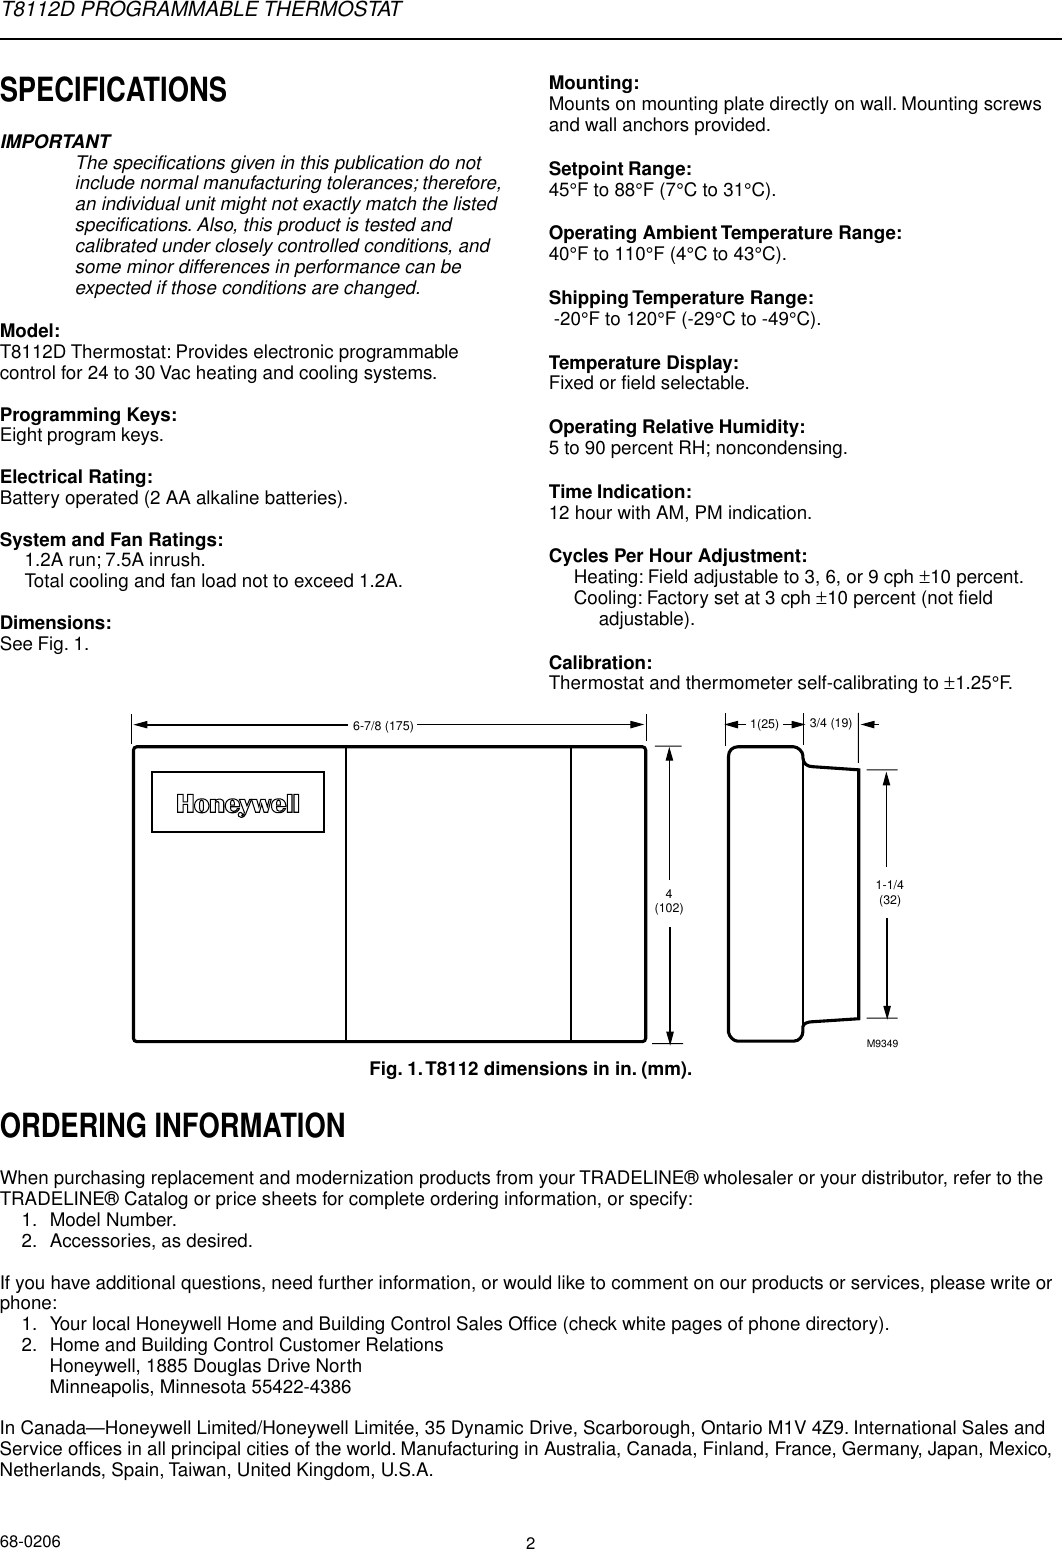 Page 2 of 8 - Honeywell Honeywell-T8112D-Owners-Manual- 68-0170 - T8112 Programmable Thermostat  Honeywell-t8112d-owners-manual